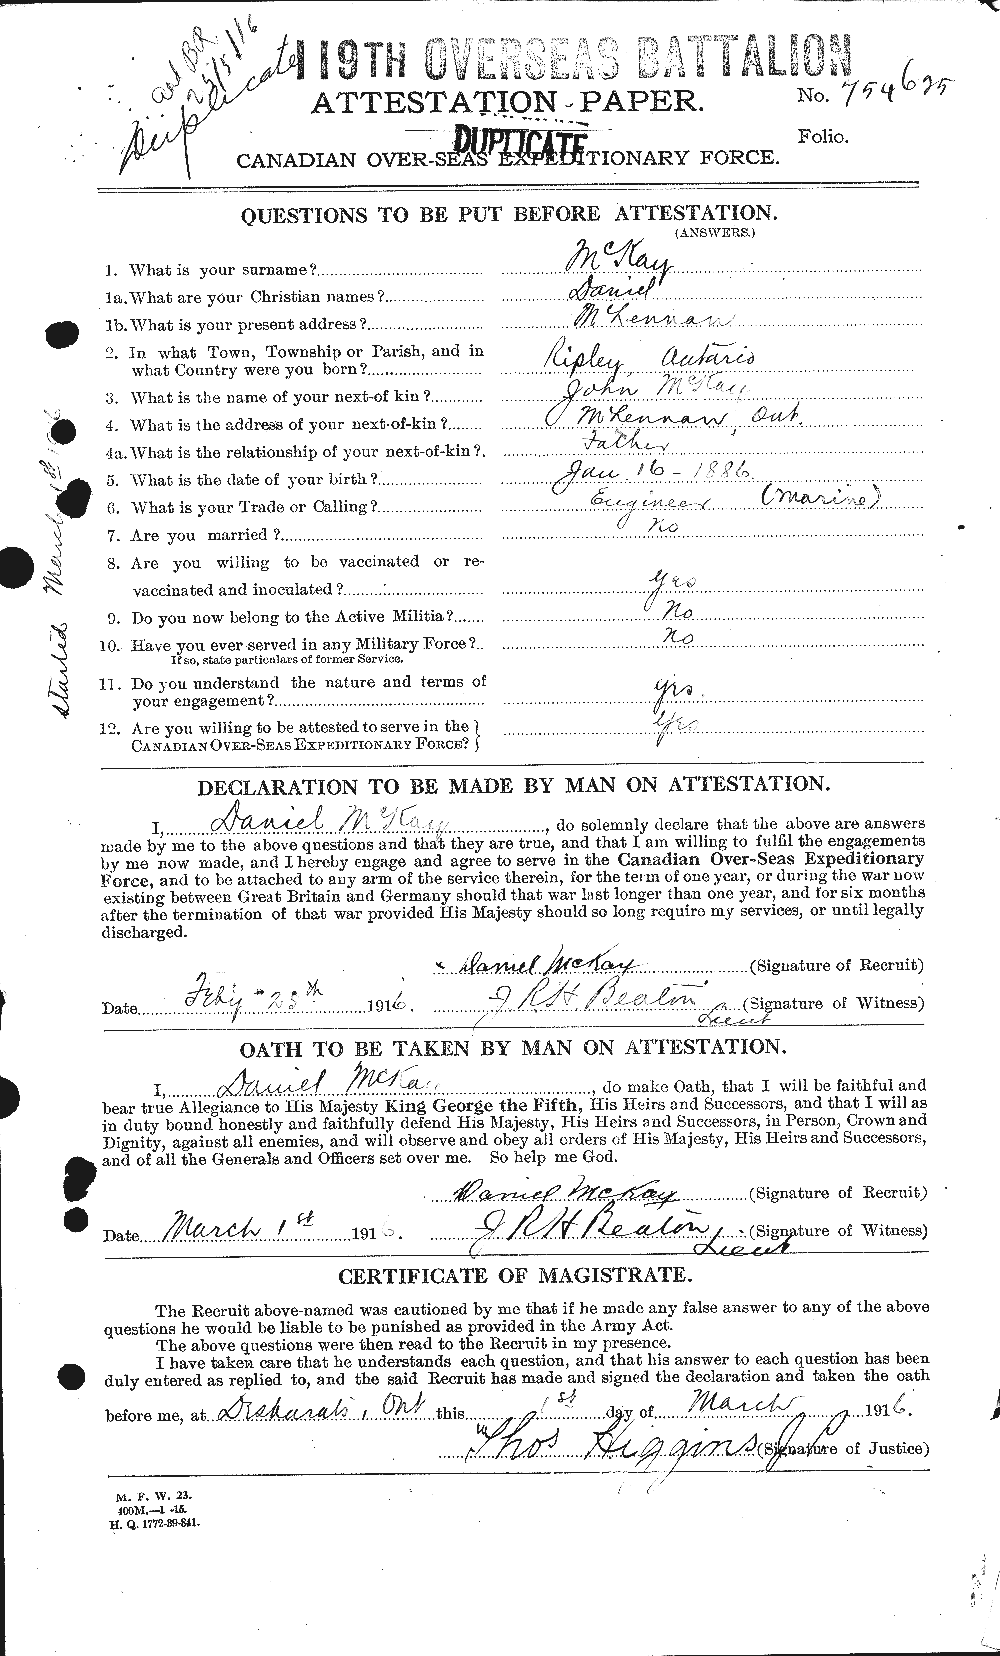 Personnel Records of the First World War - CEF 531111a